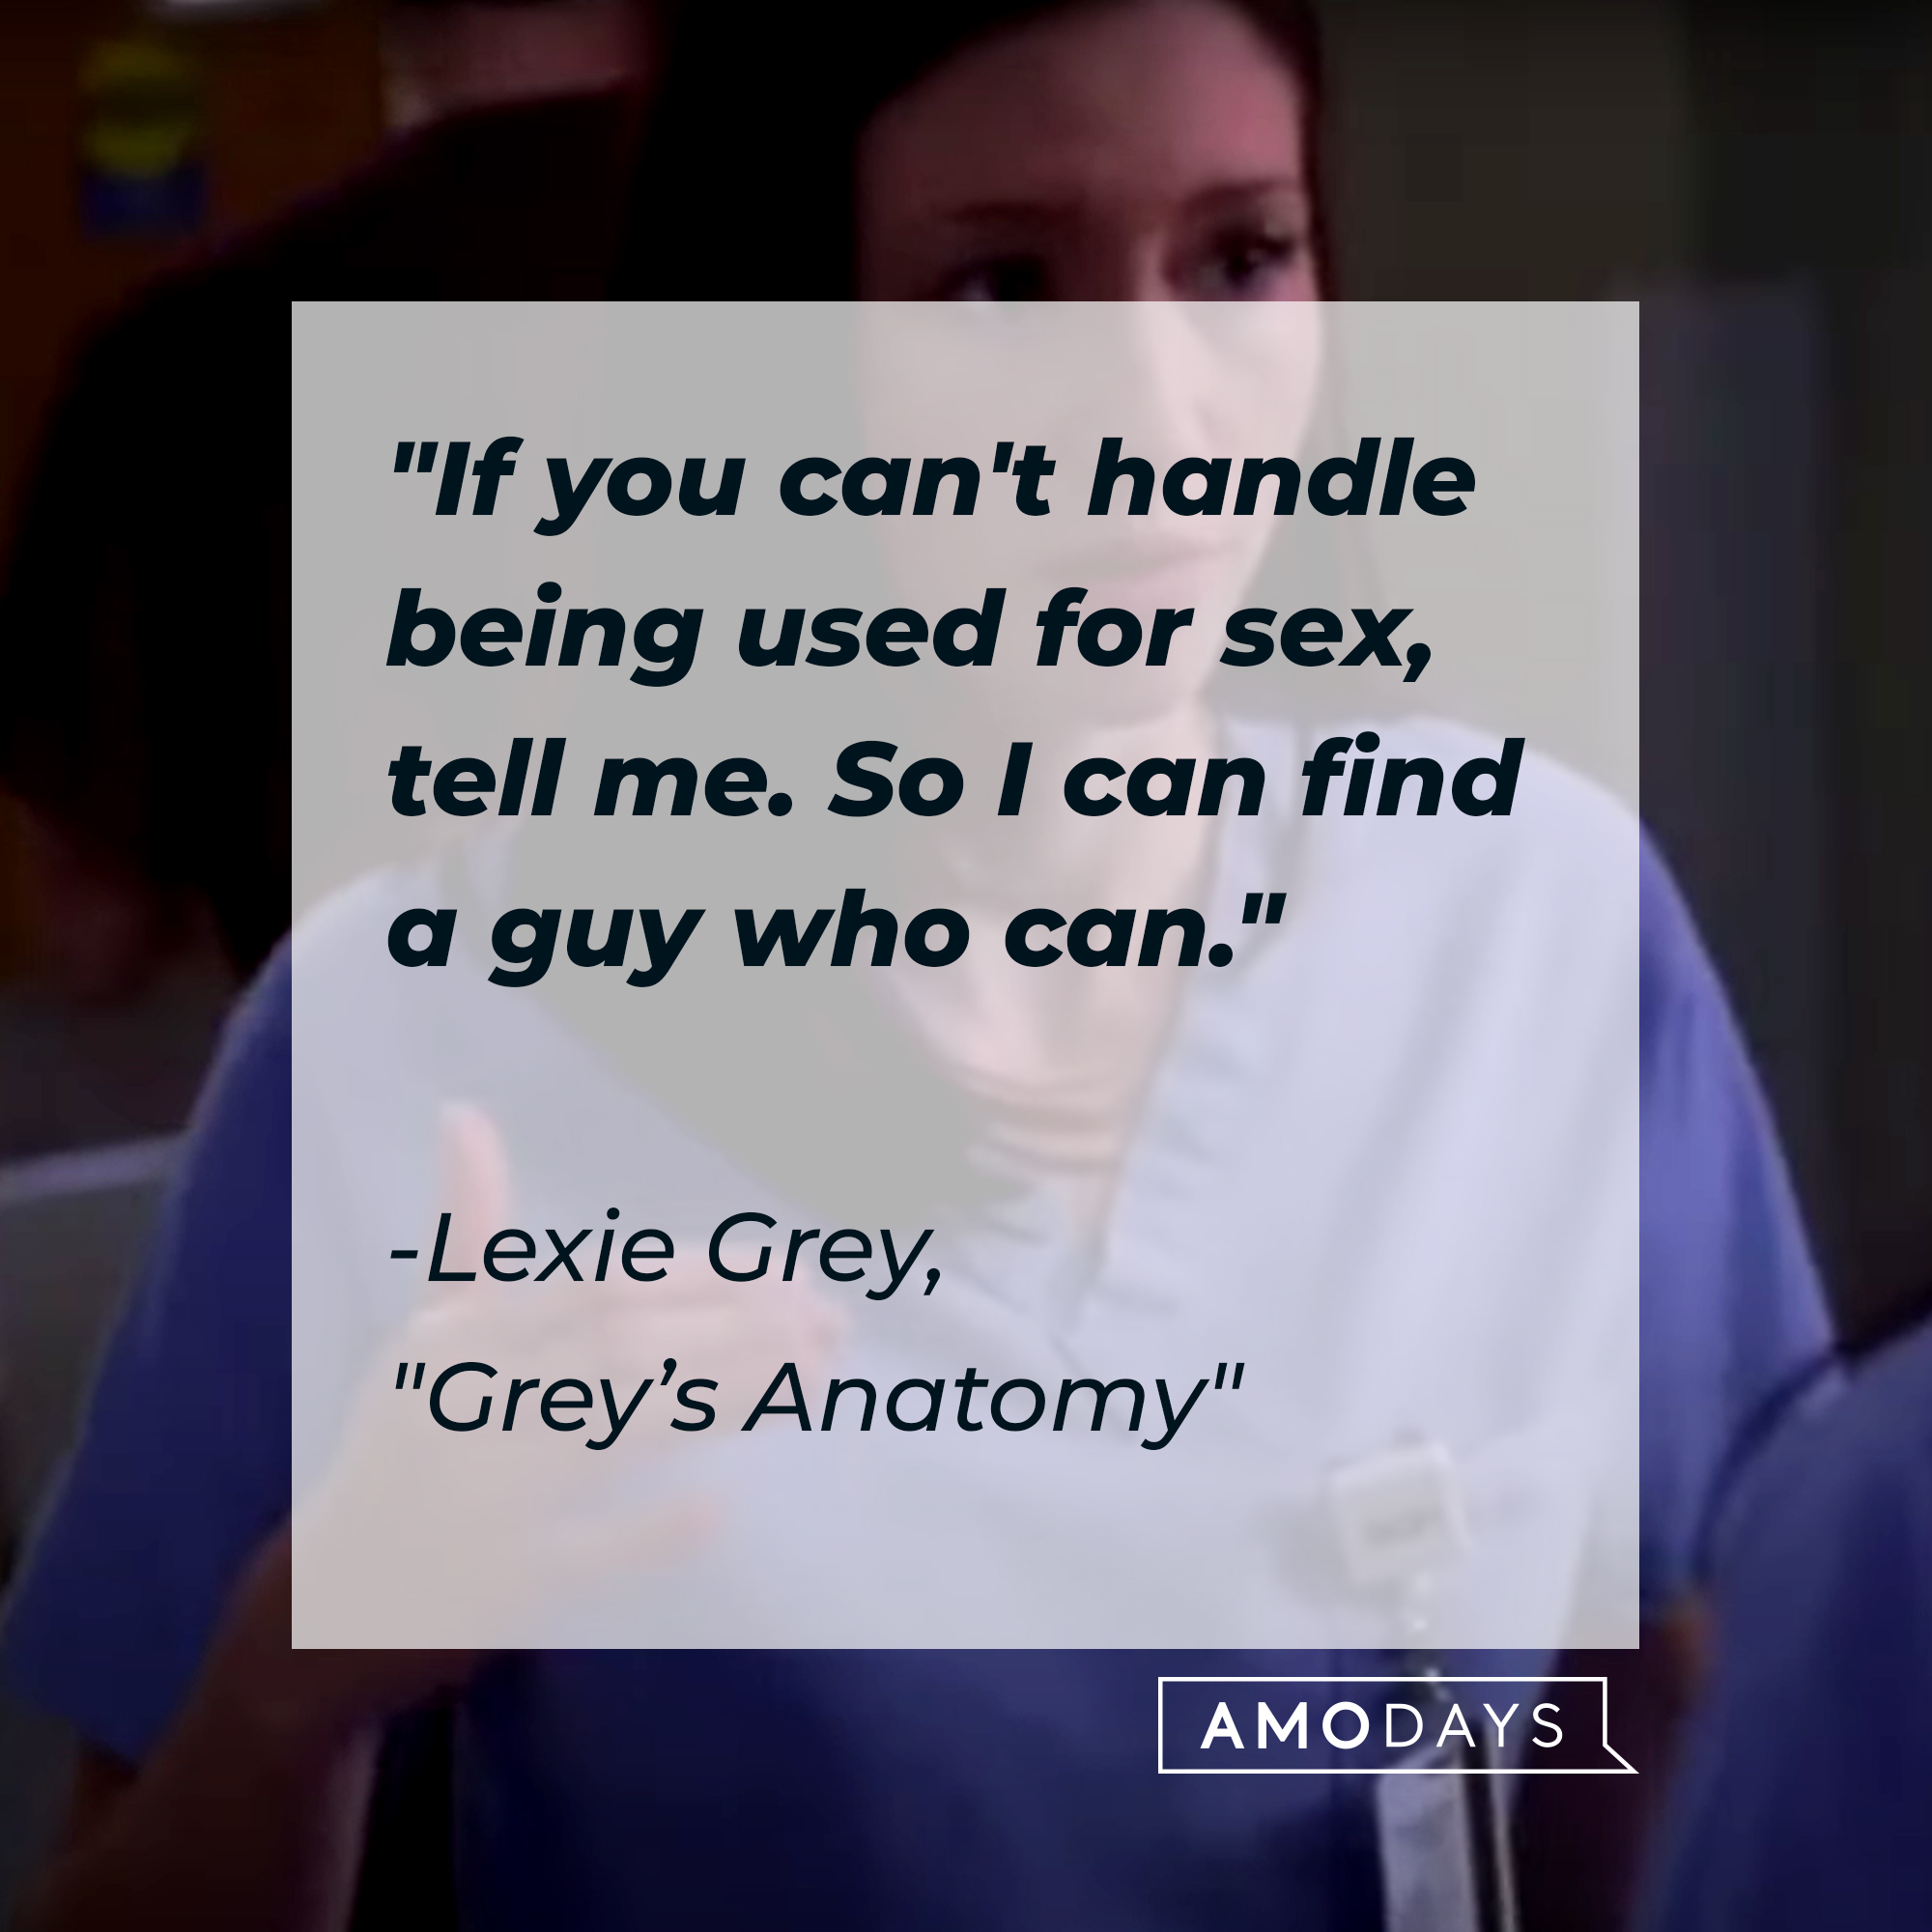 Lexie Grey with her quote: "If you can't handle being used for sex, tell me. So I can find a guy who can." | Source: Facebook.com/GreysAnatomy